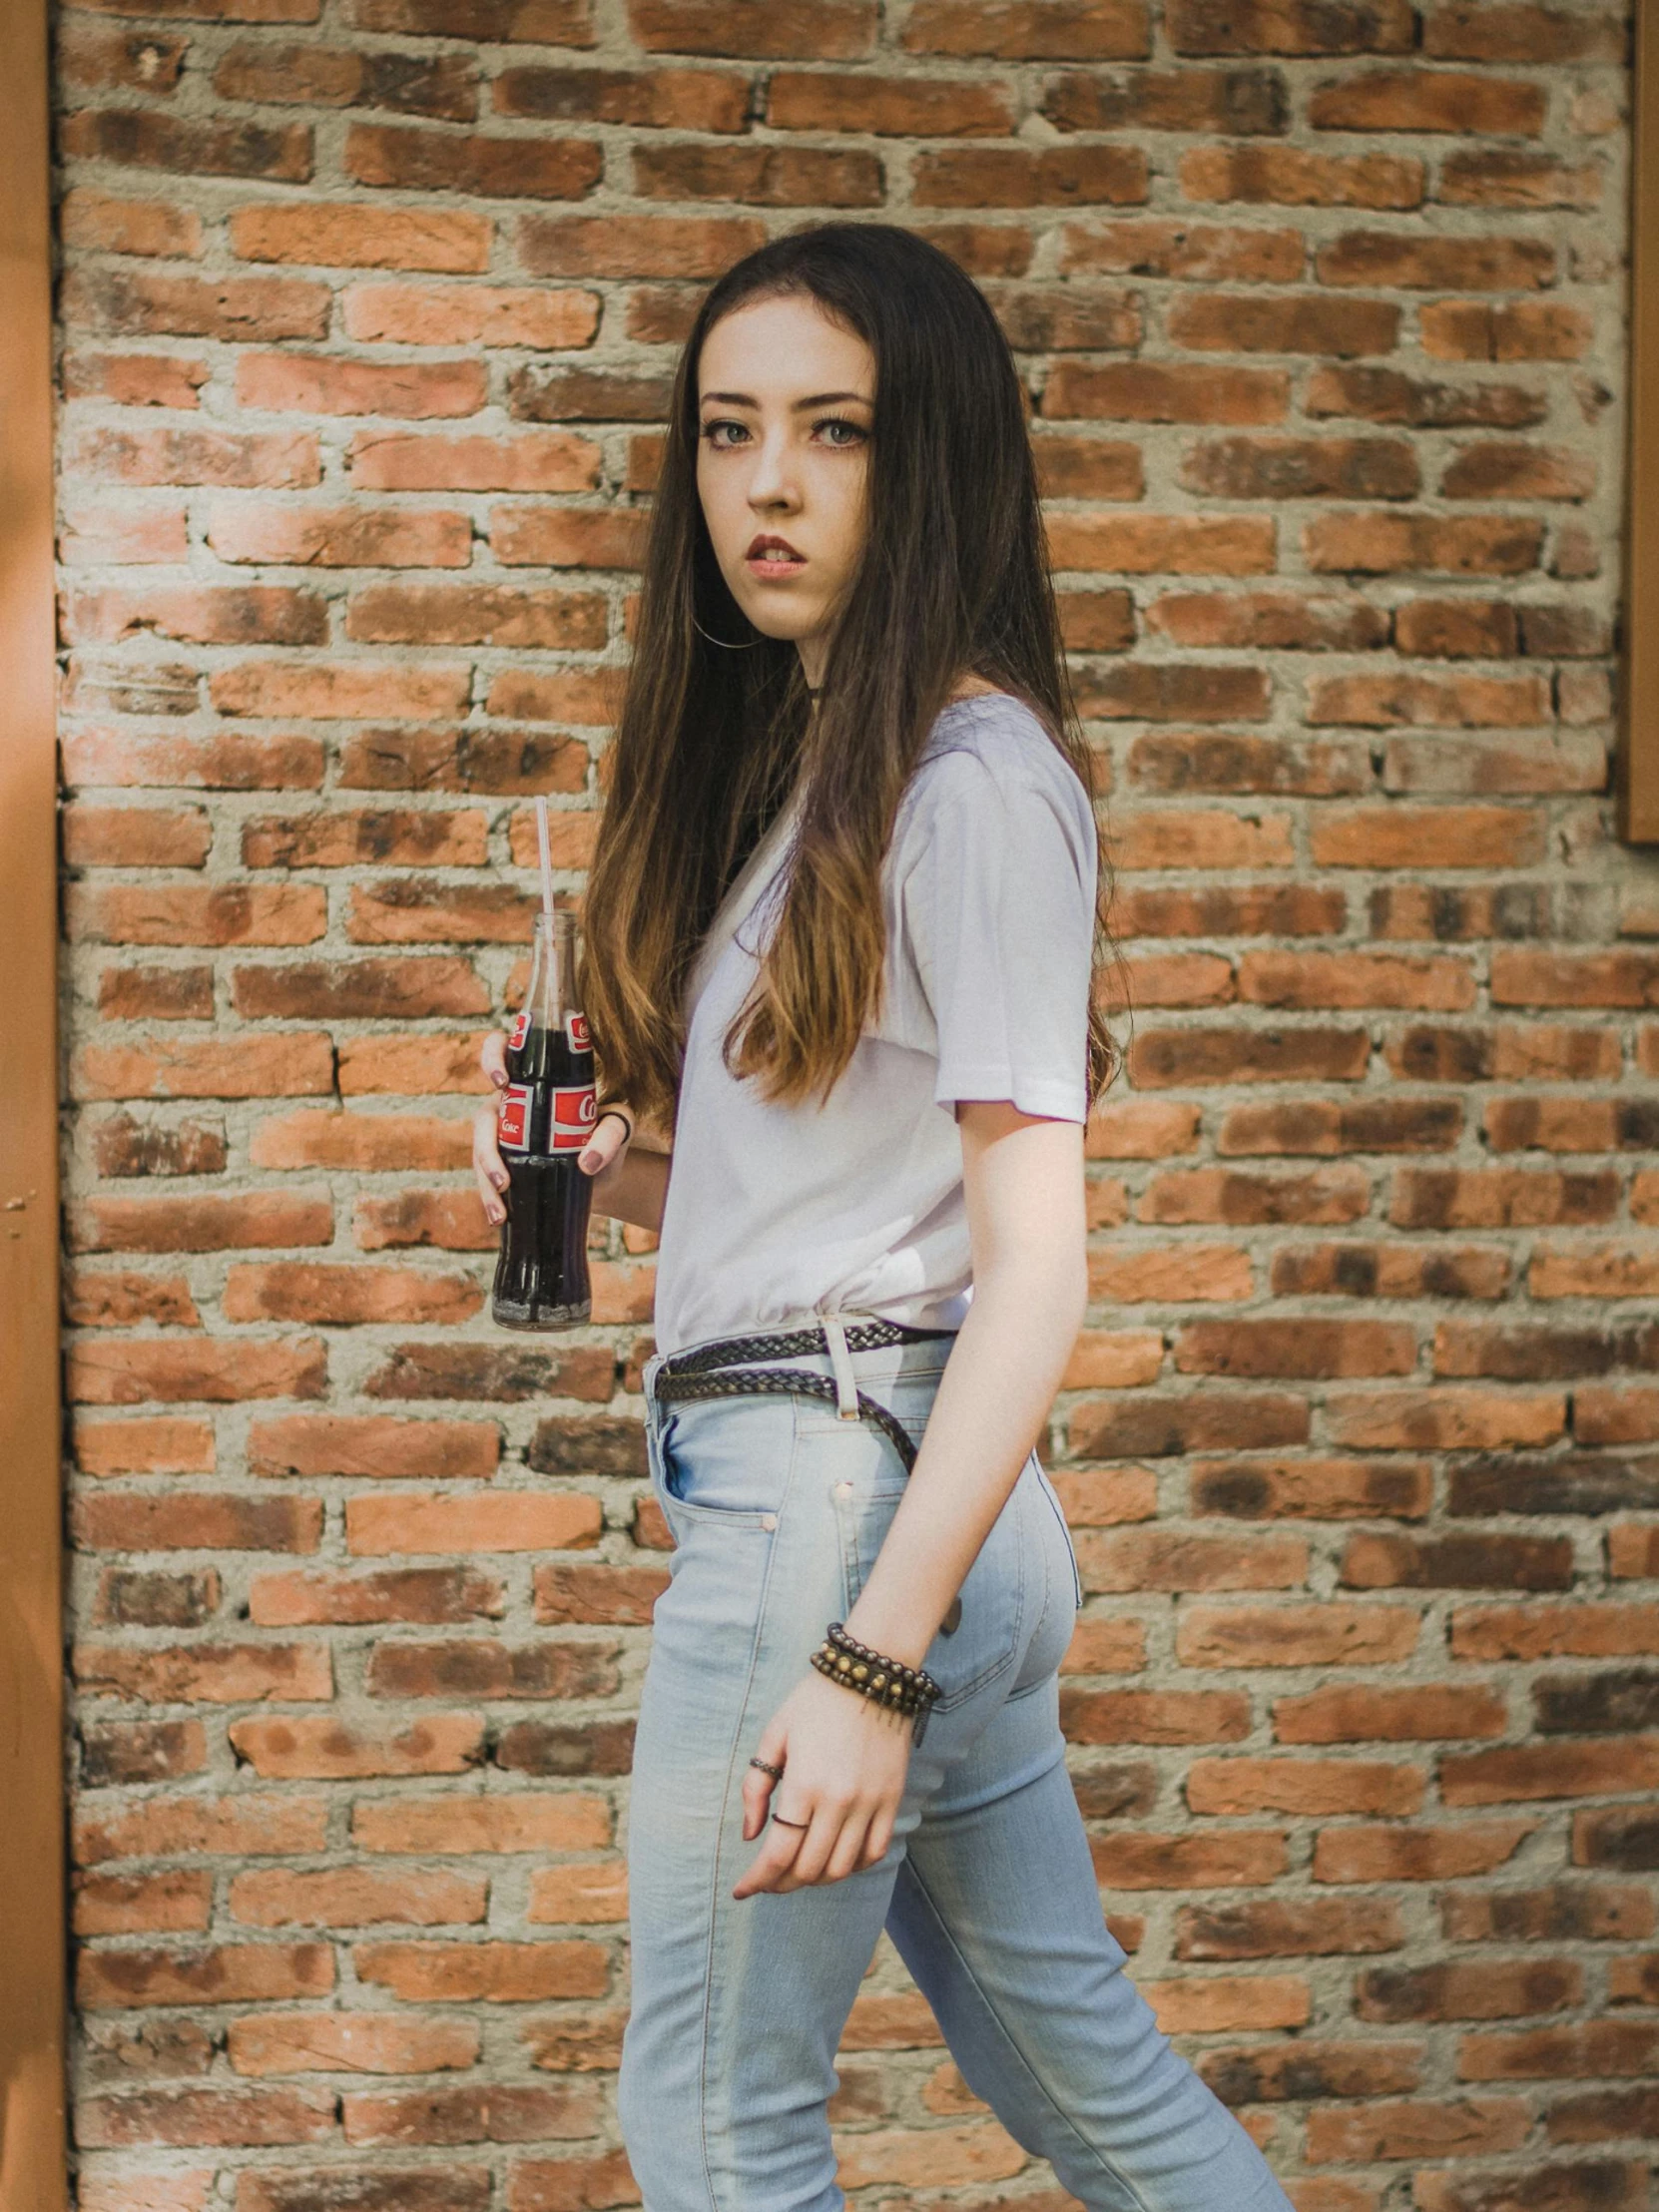 a woman walking by a brick wall and holding an iced beverage